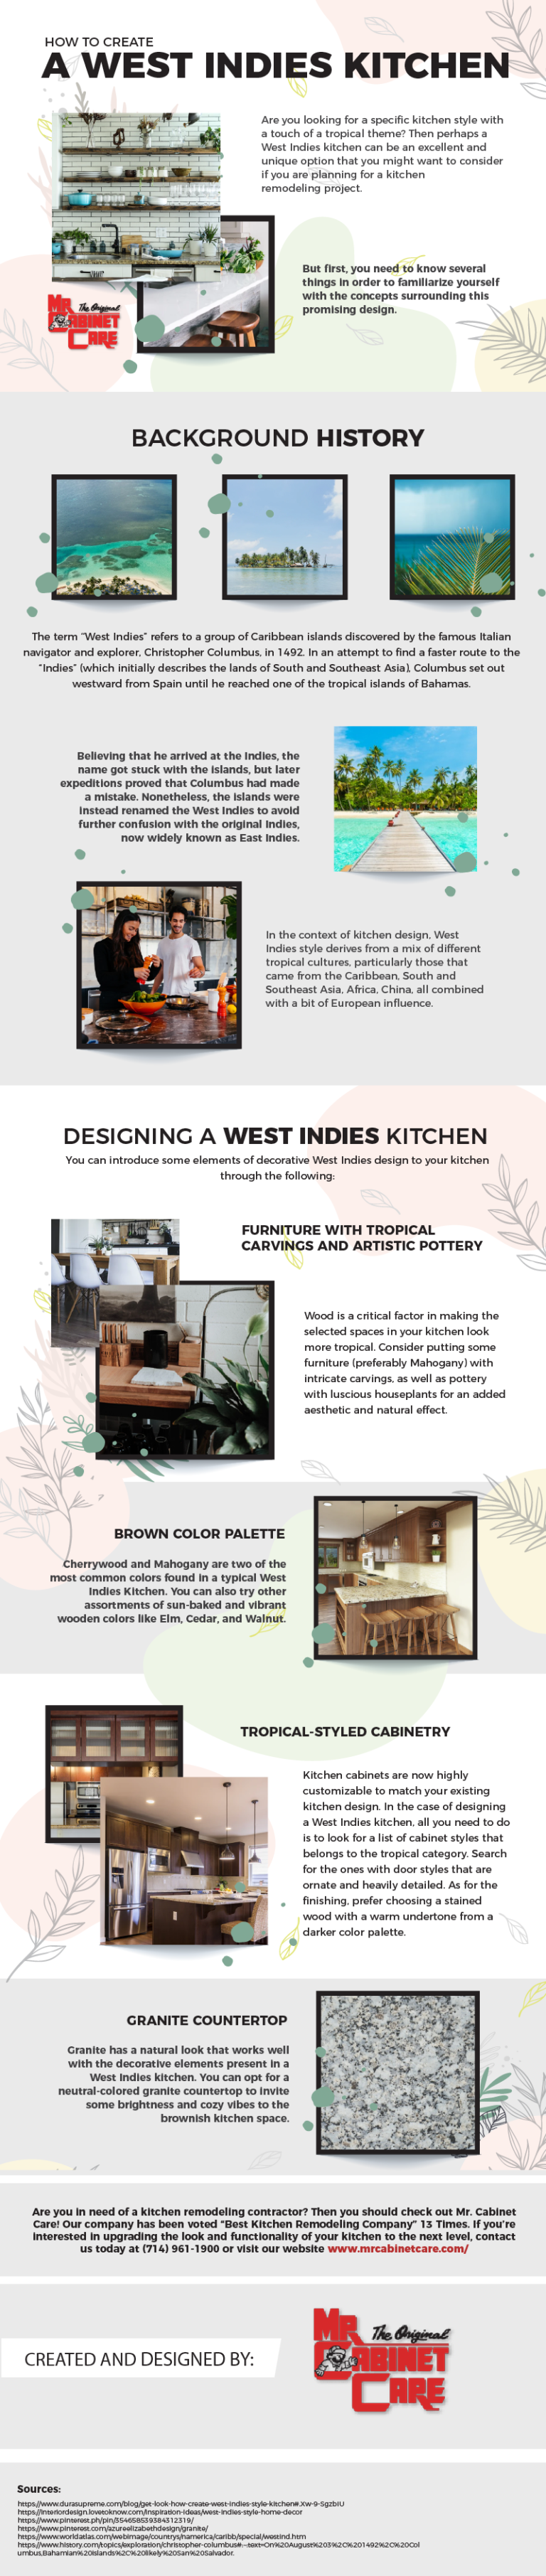 How to Create a West Indies Kitchen